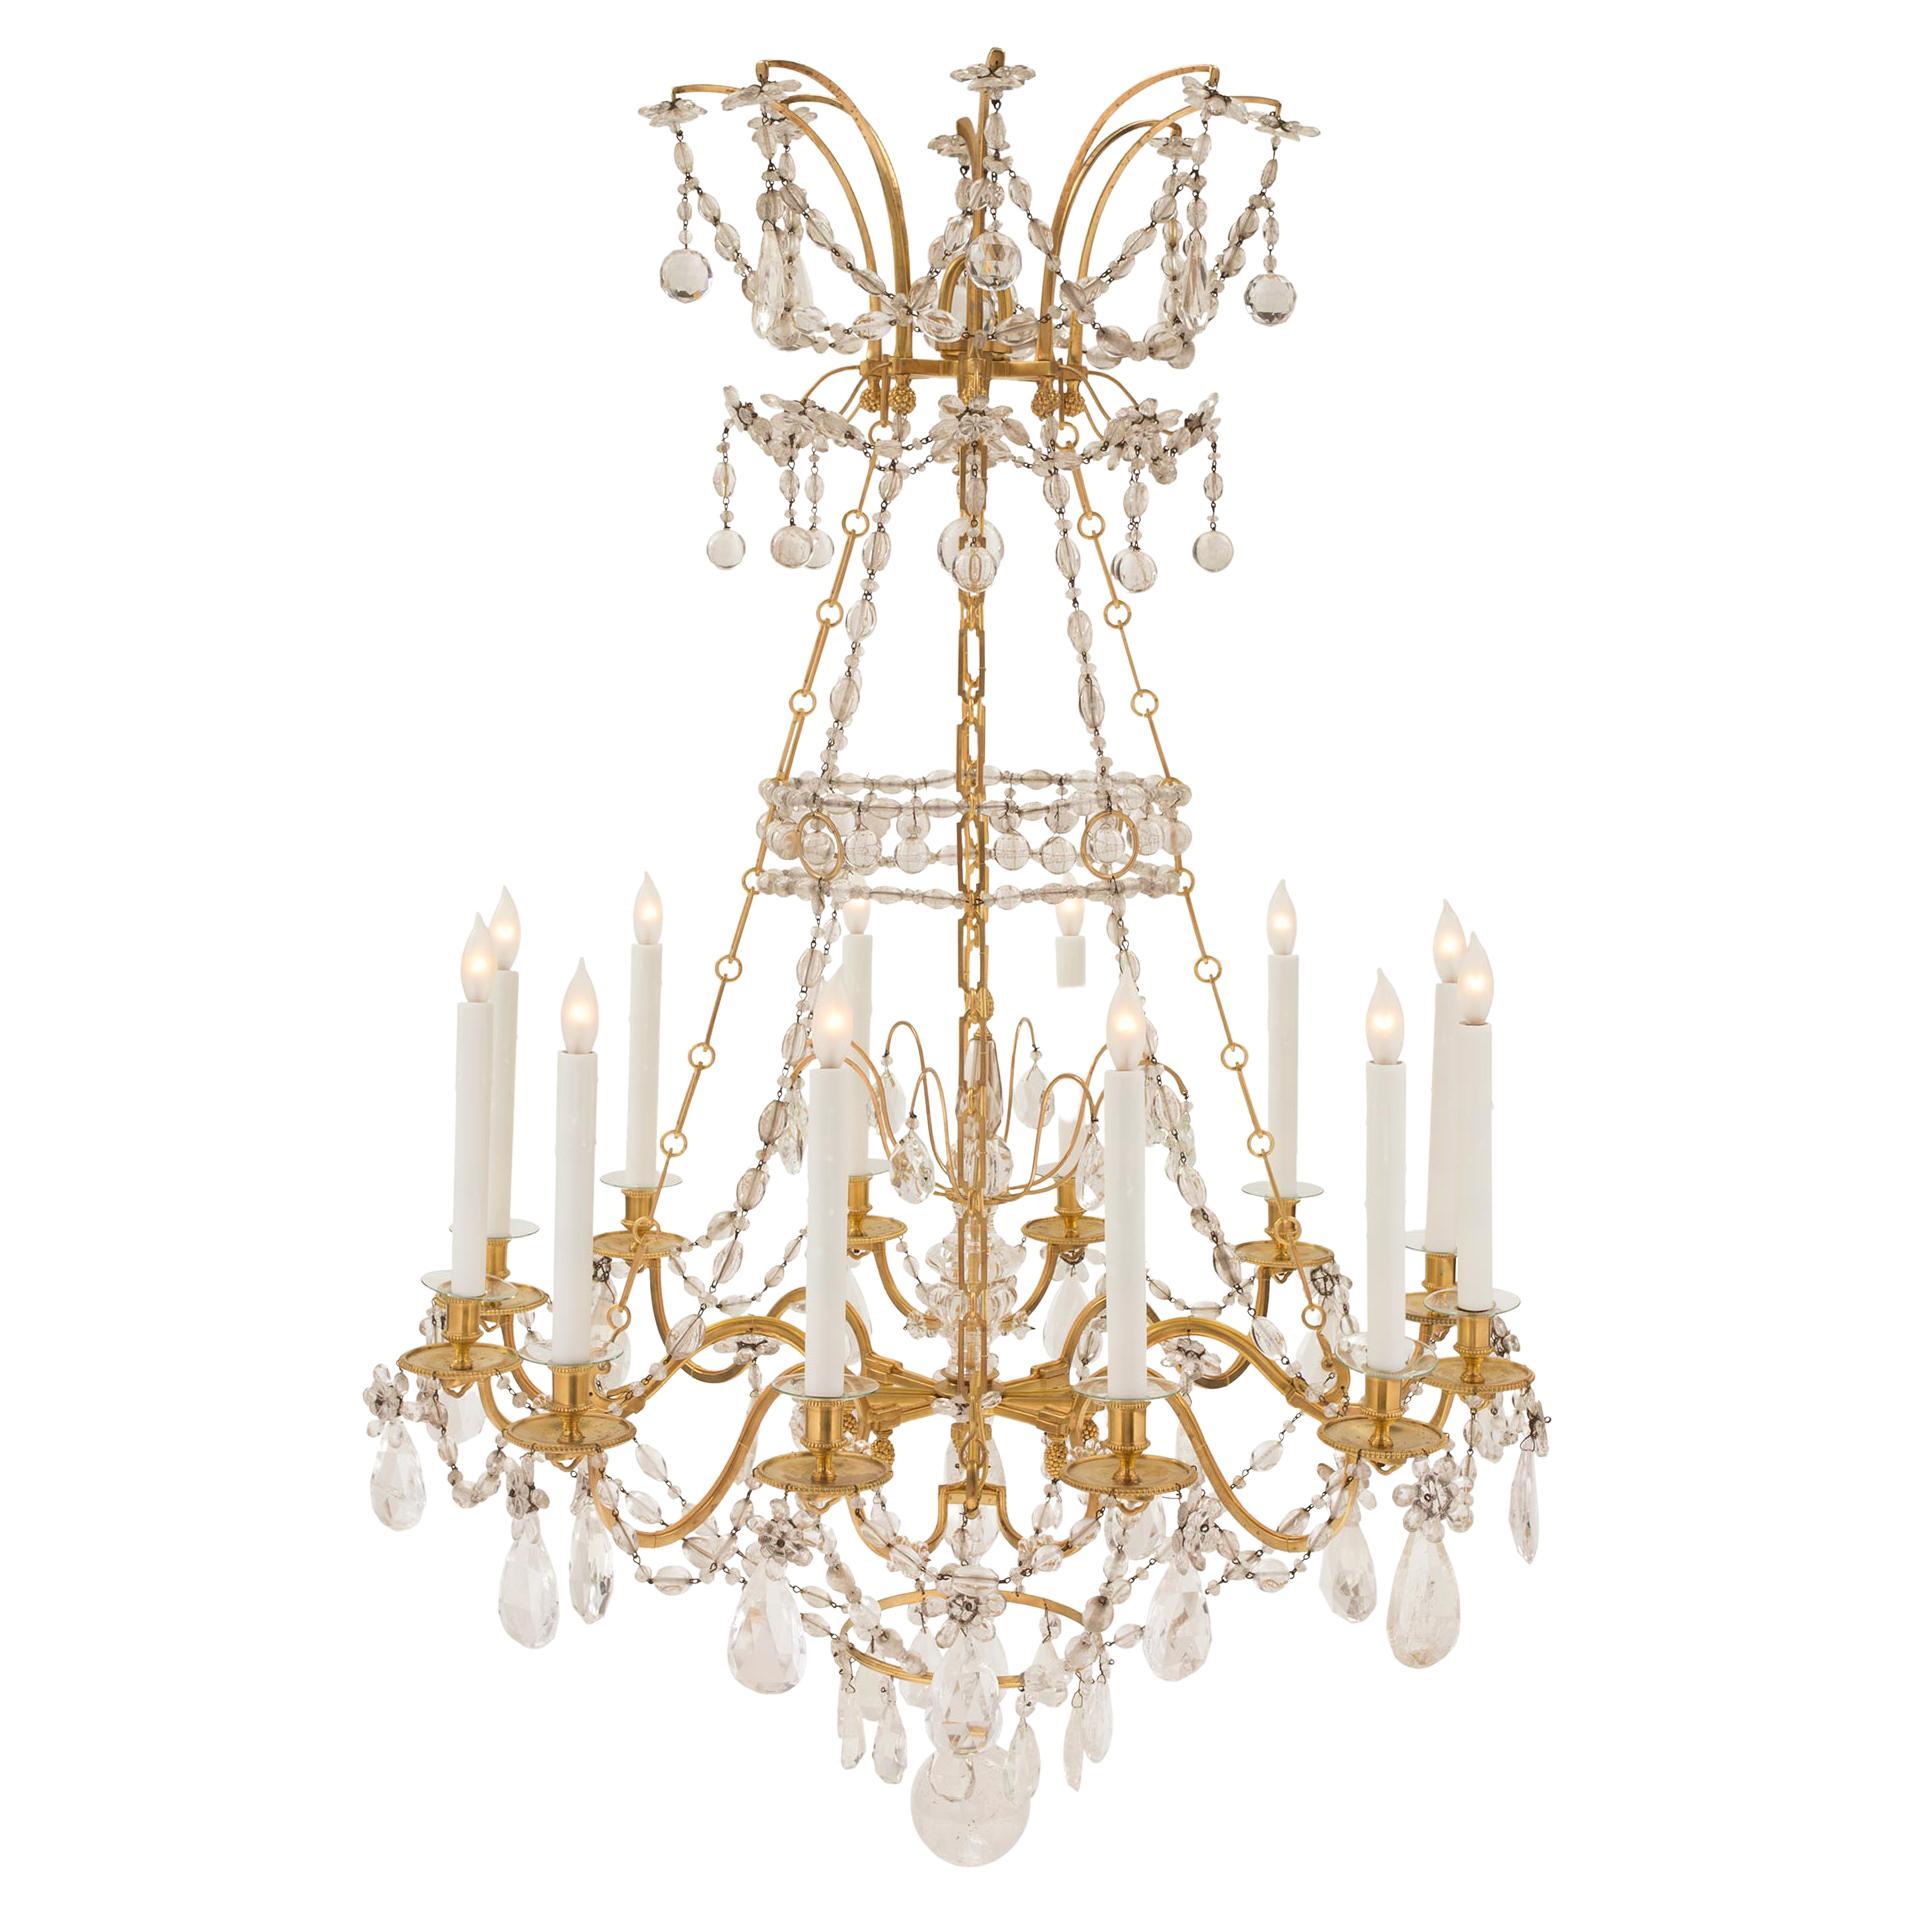 French 19th Century Louis XVI Style Ormolu, Baccarat and Rock Crystal Chandelier